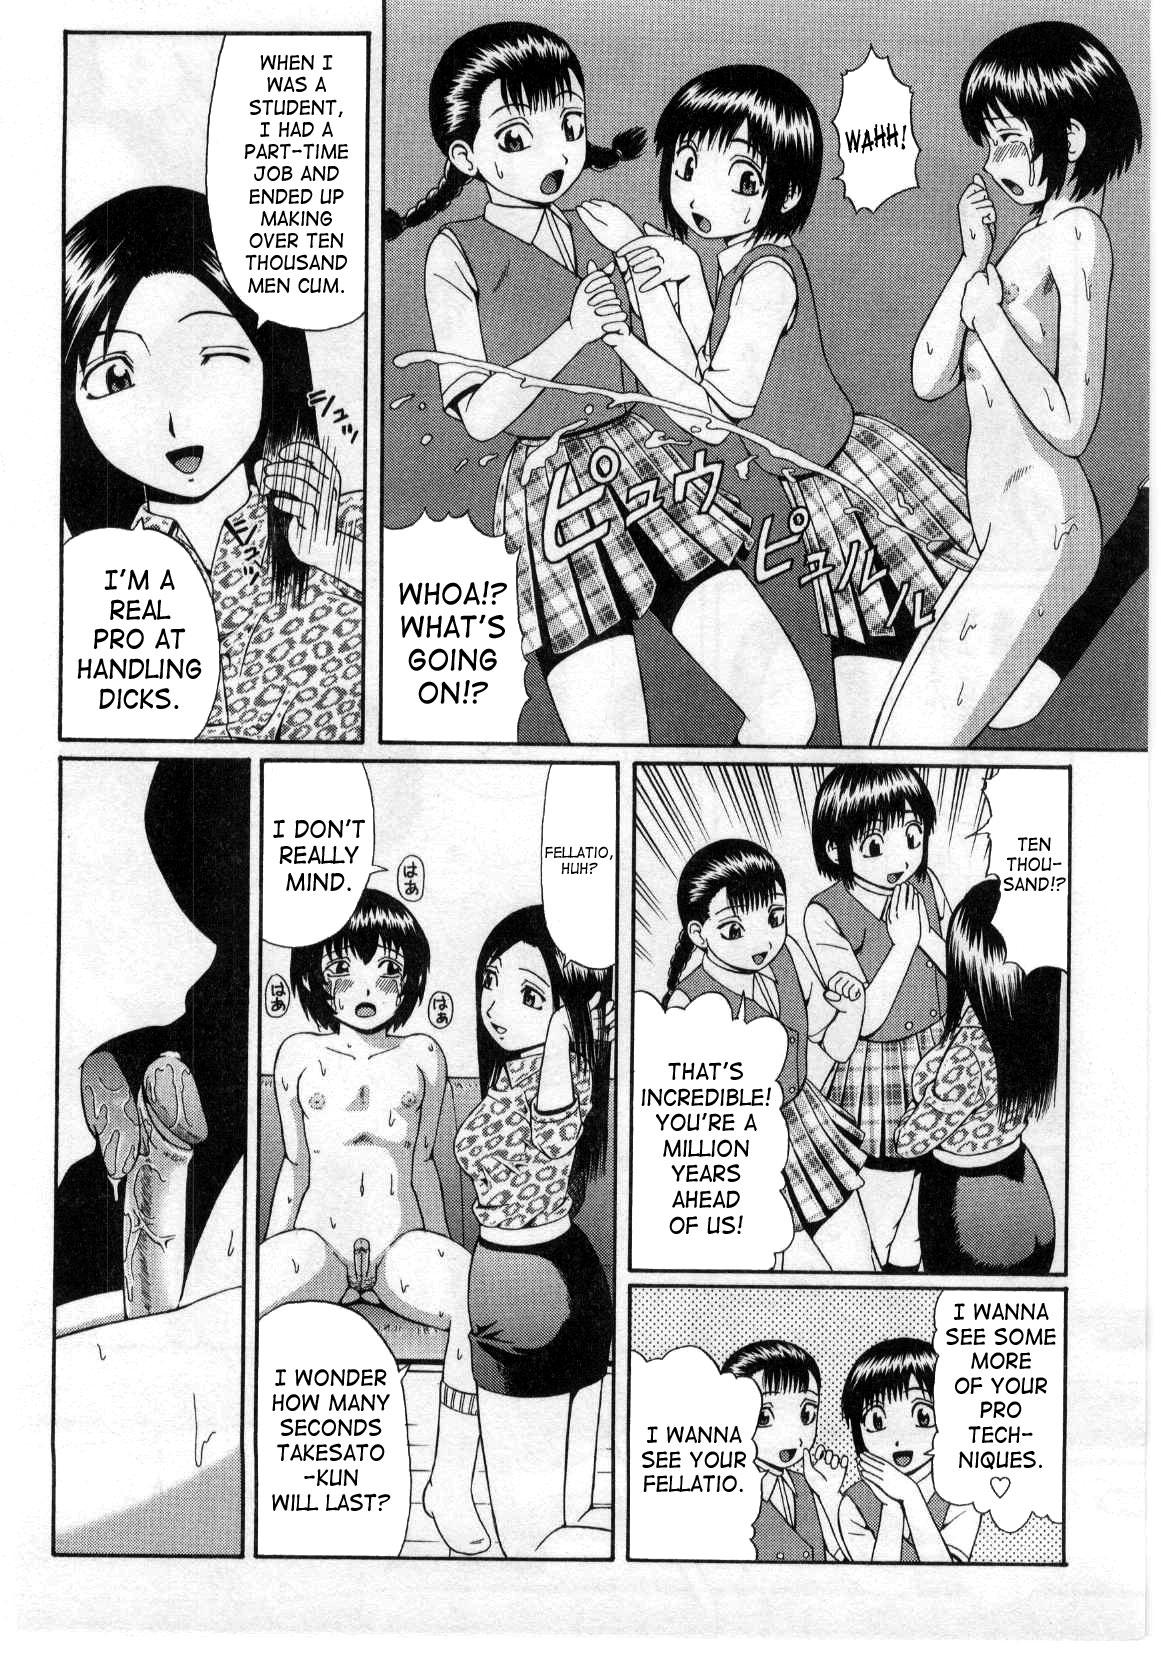 Chacal Suisen no Jouken | Condition of Recommendation Oil - Page 8